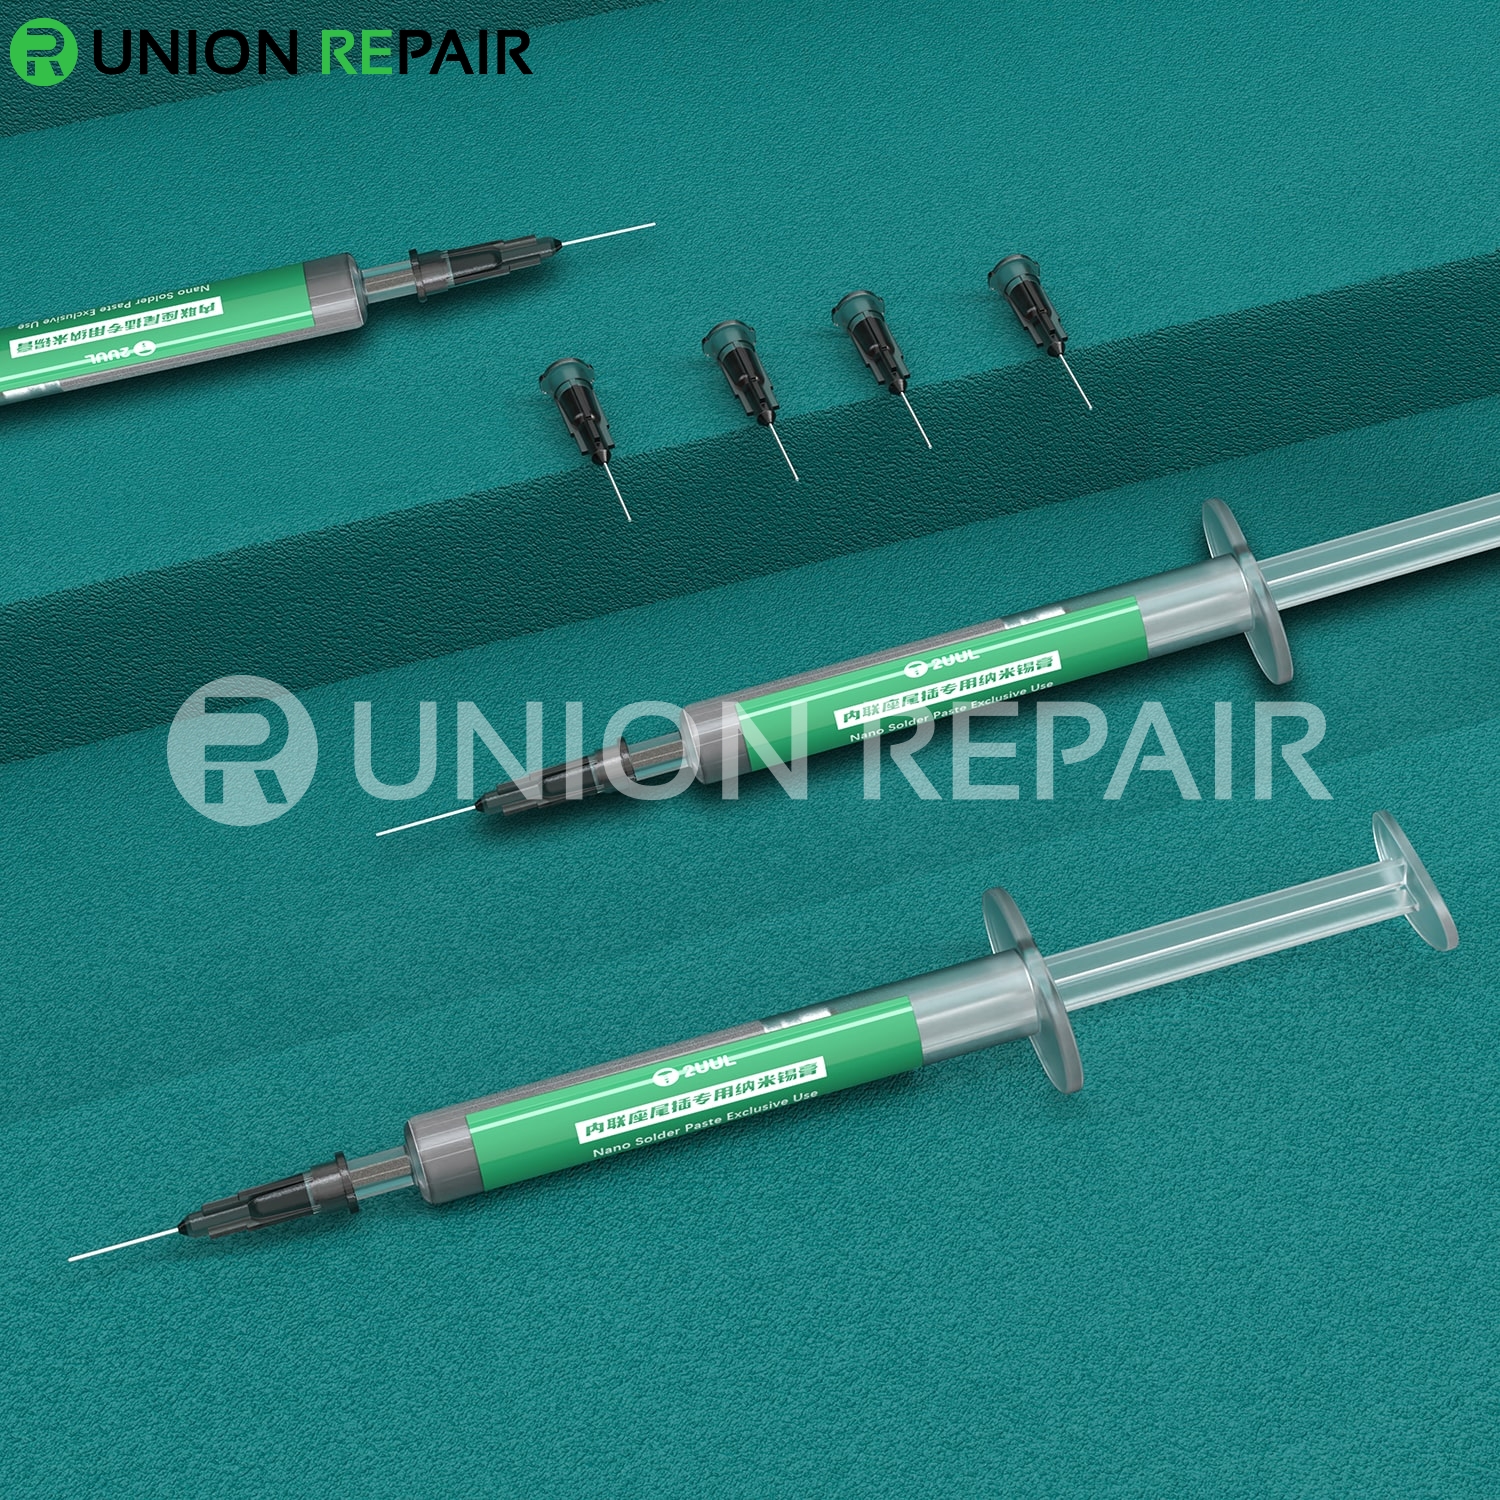 2UUL Nano Solder Paste Exclusive Use for Dock&FPC Connector